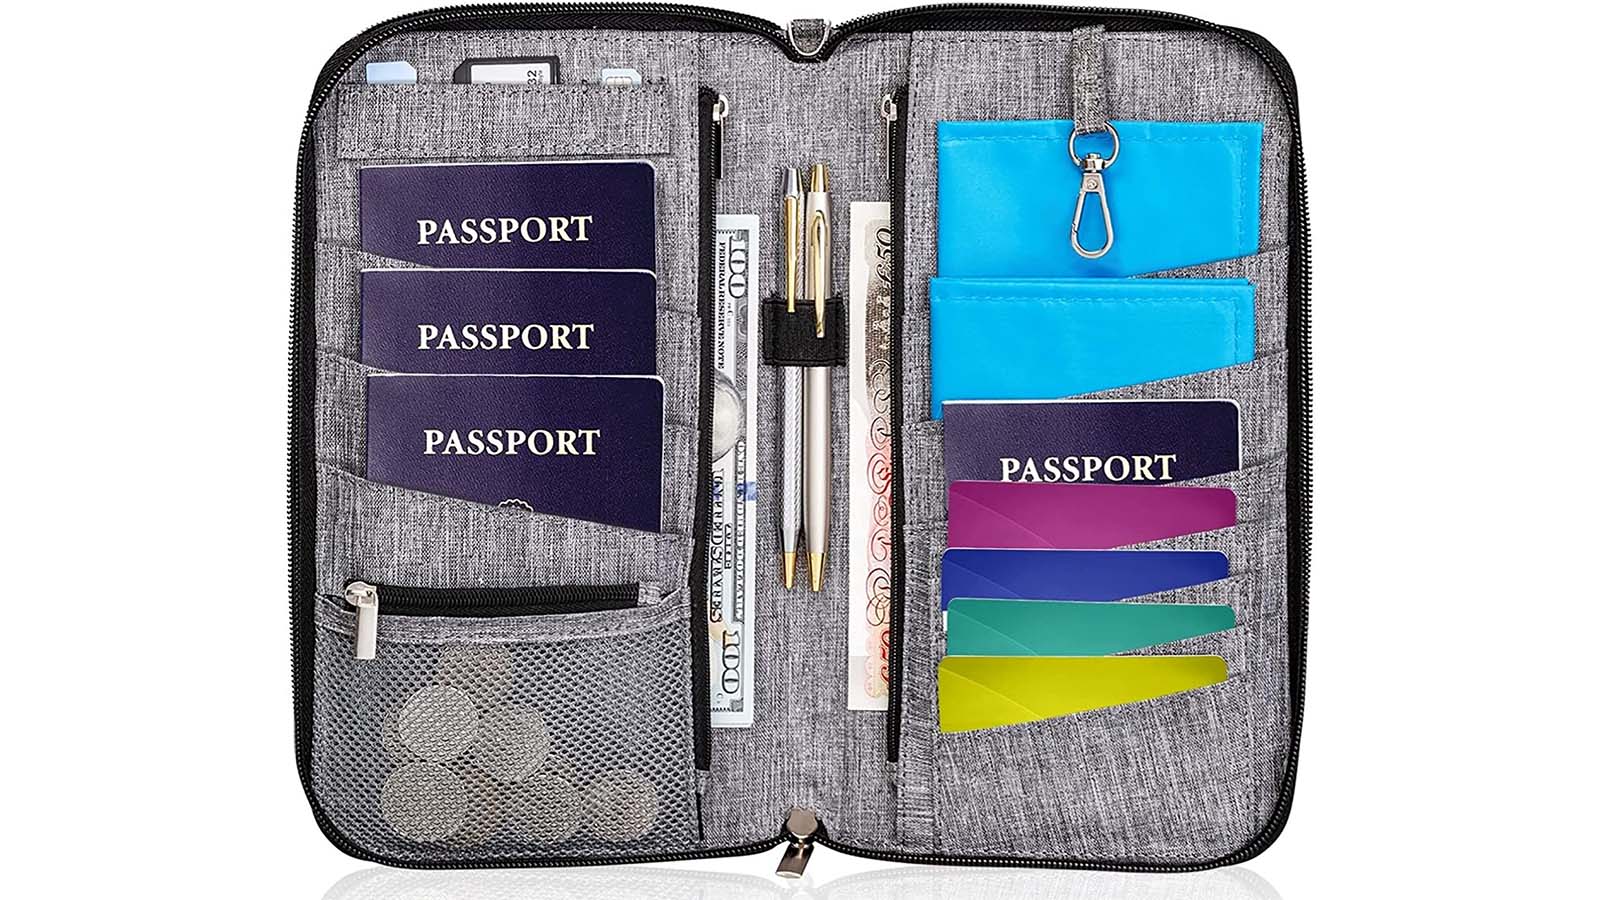 I love the passport holder! Great for those who frequently travel and